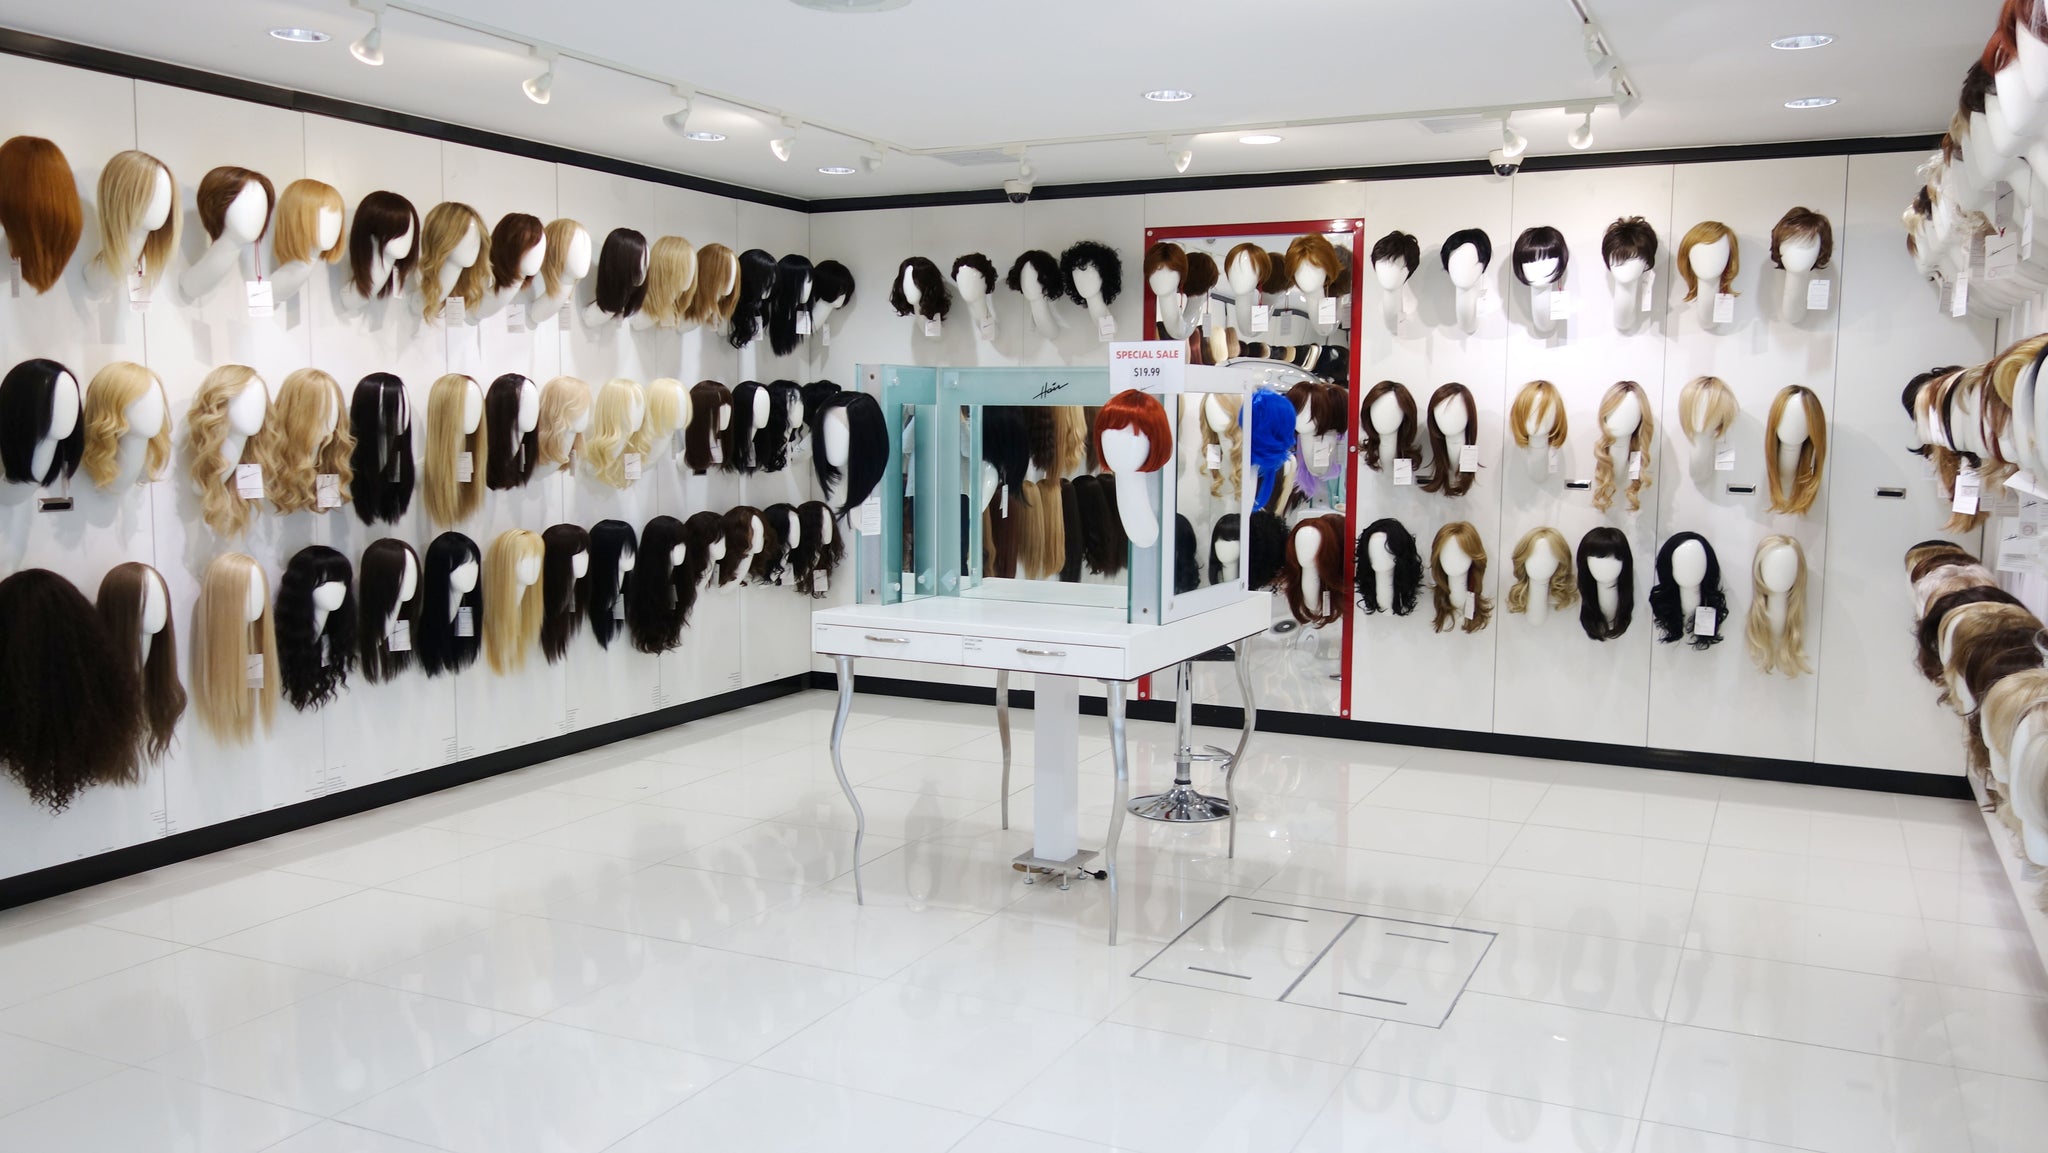 Display of wigs on mannequin heads along the walls